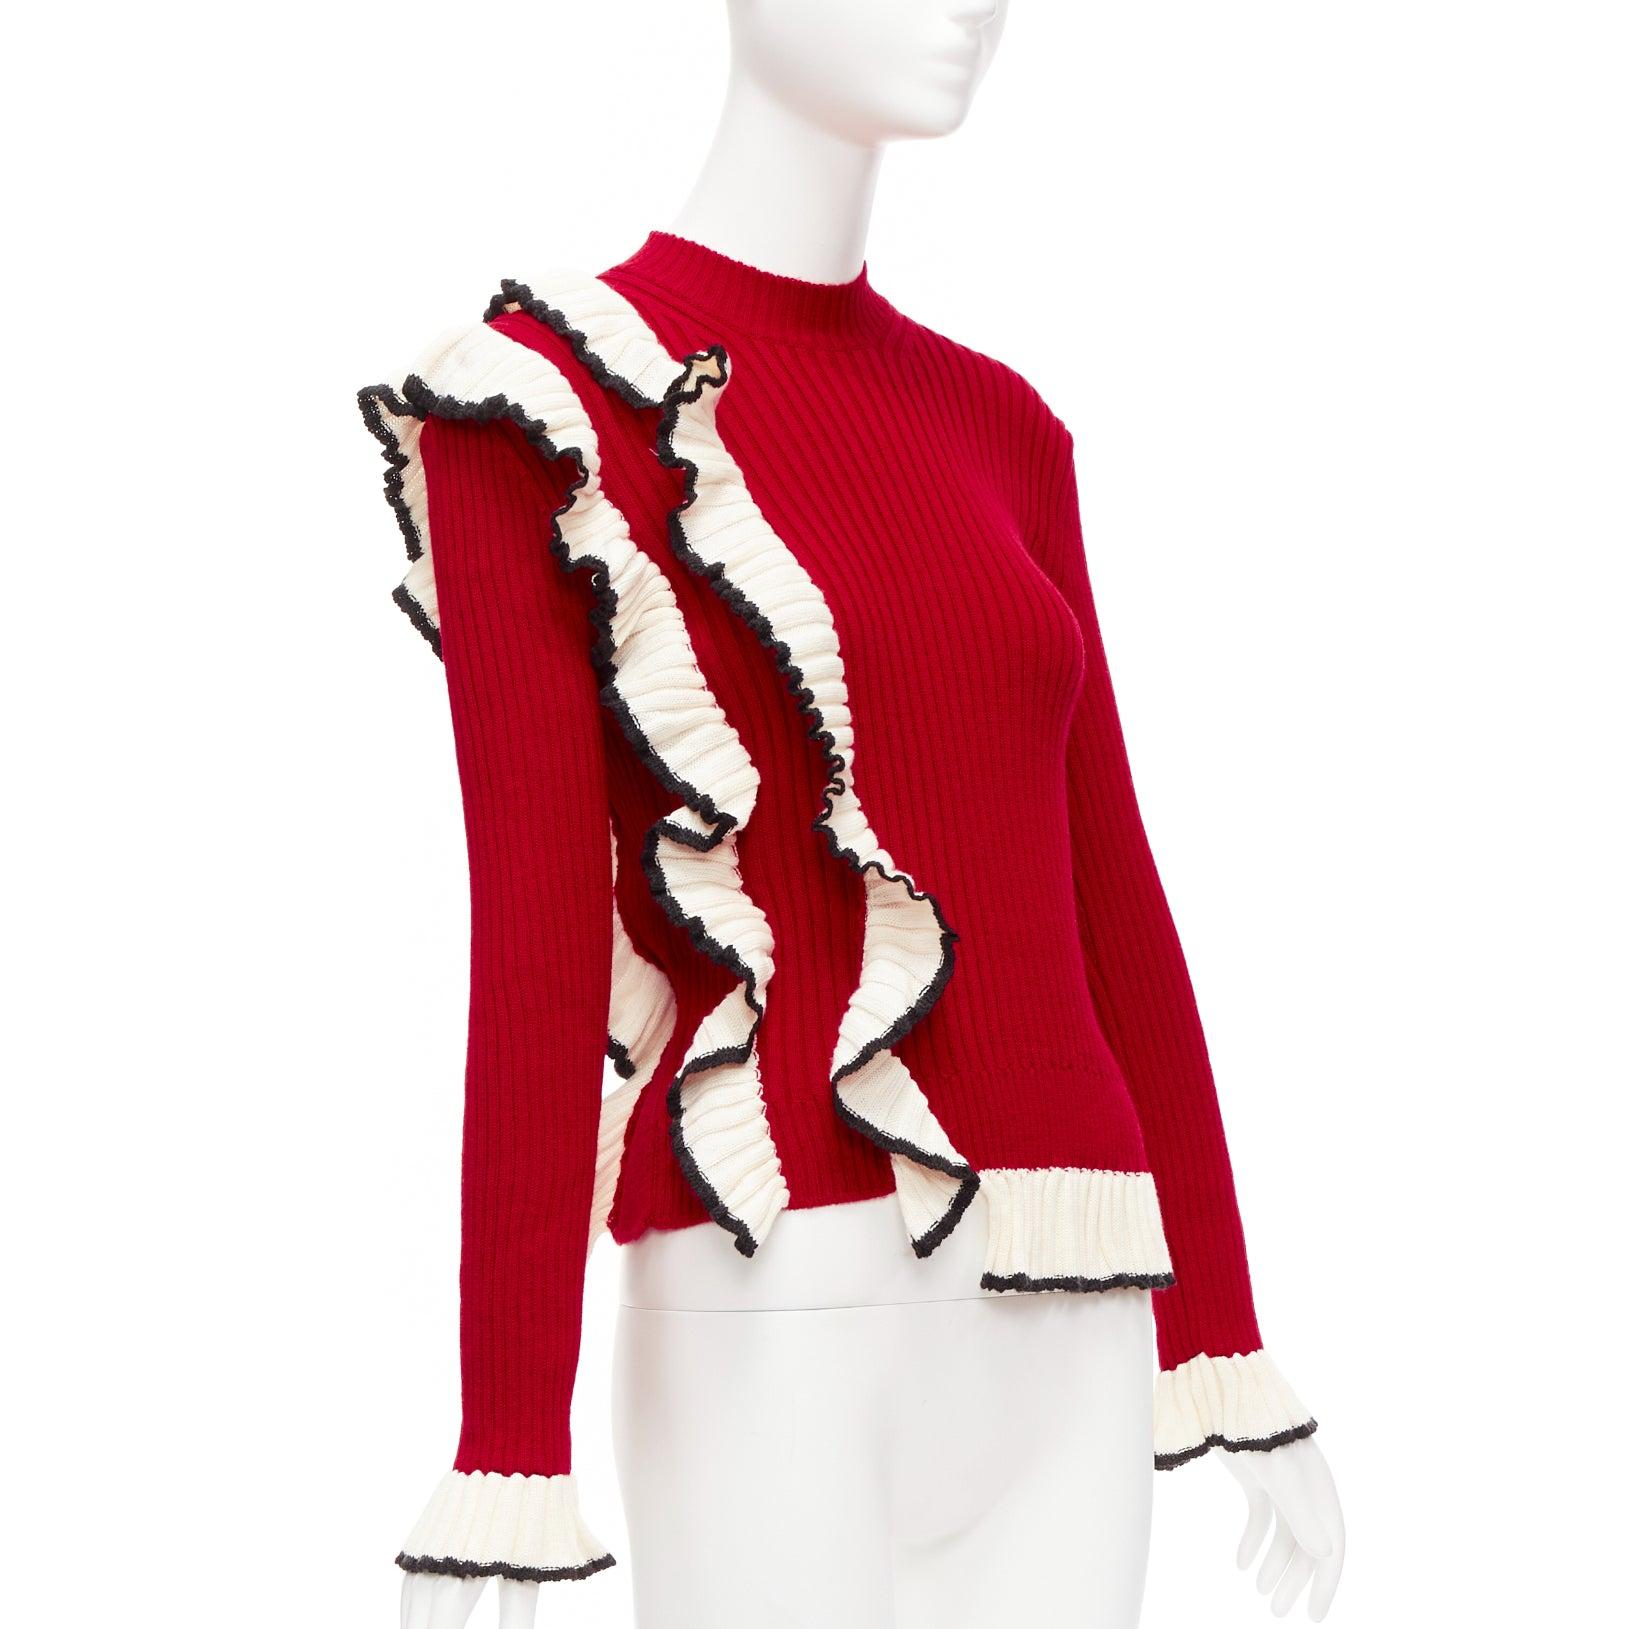 MSGM red wool blend white ruffle trim flared cuff ribbed knit sweater top XS
Reference: AAWC/A00642
Brand: MSGM
Material: Wool, Acrylic
Color: Red, Cream
Pattern: Solid
Extra Details: Ruffle trim designed to like it is connected to hem.
Made in: